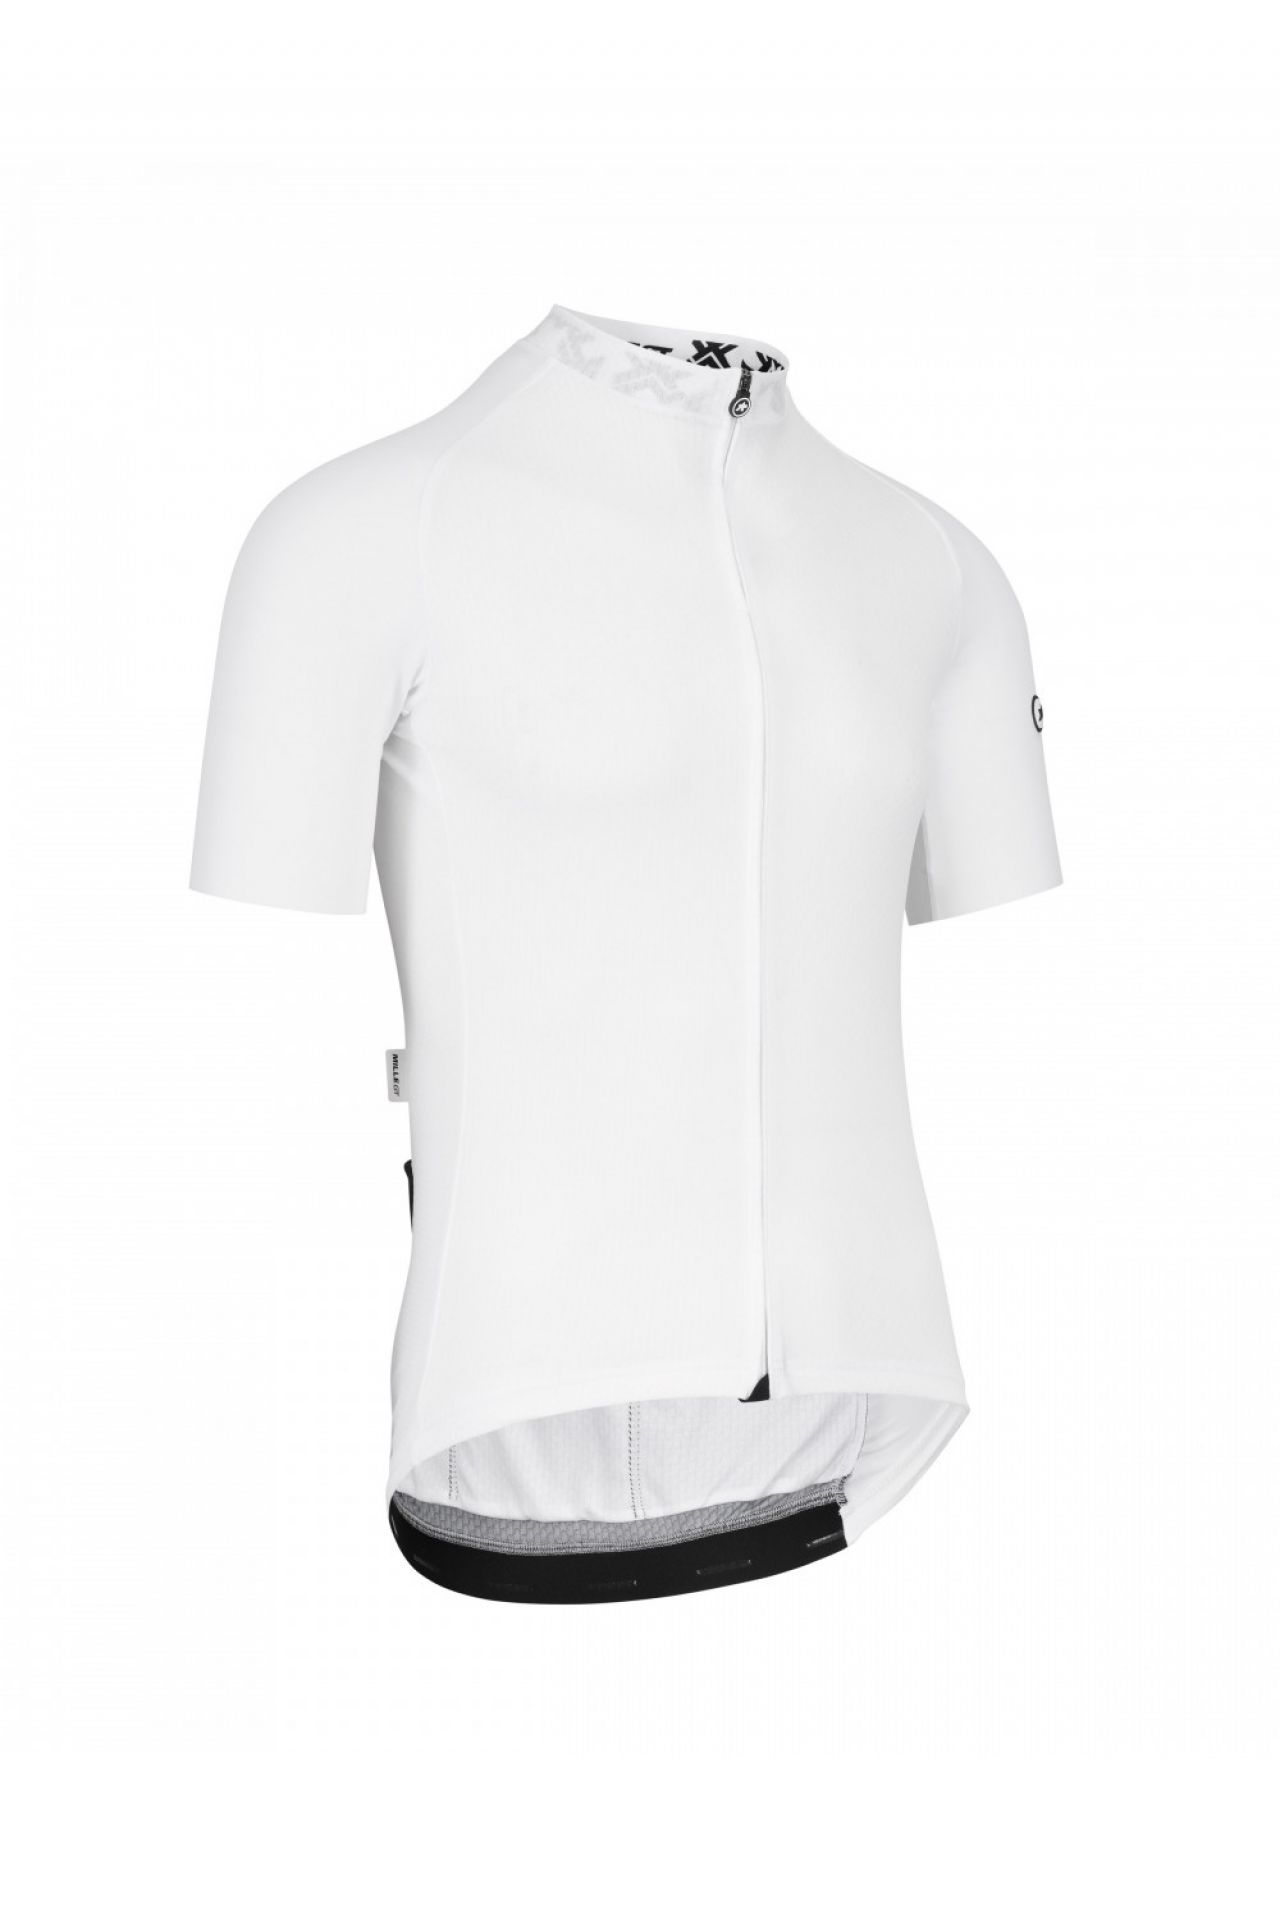 ASSOS MILLE GT JERSEY C2 HOLLYT WHITE Maillot vélo